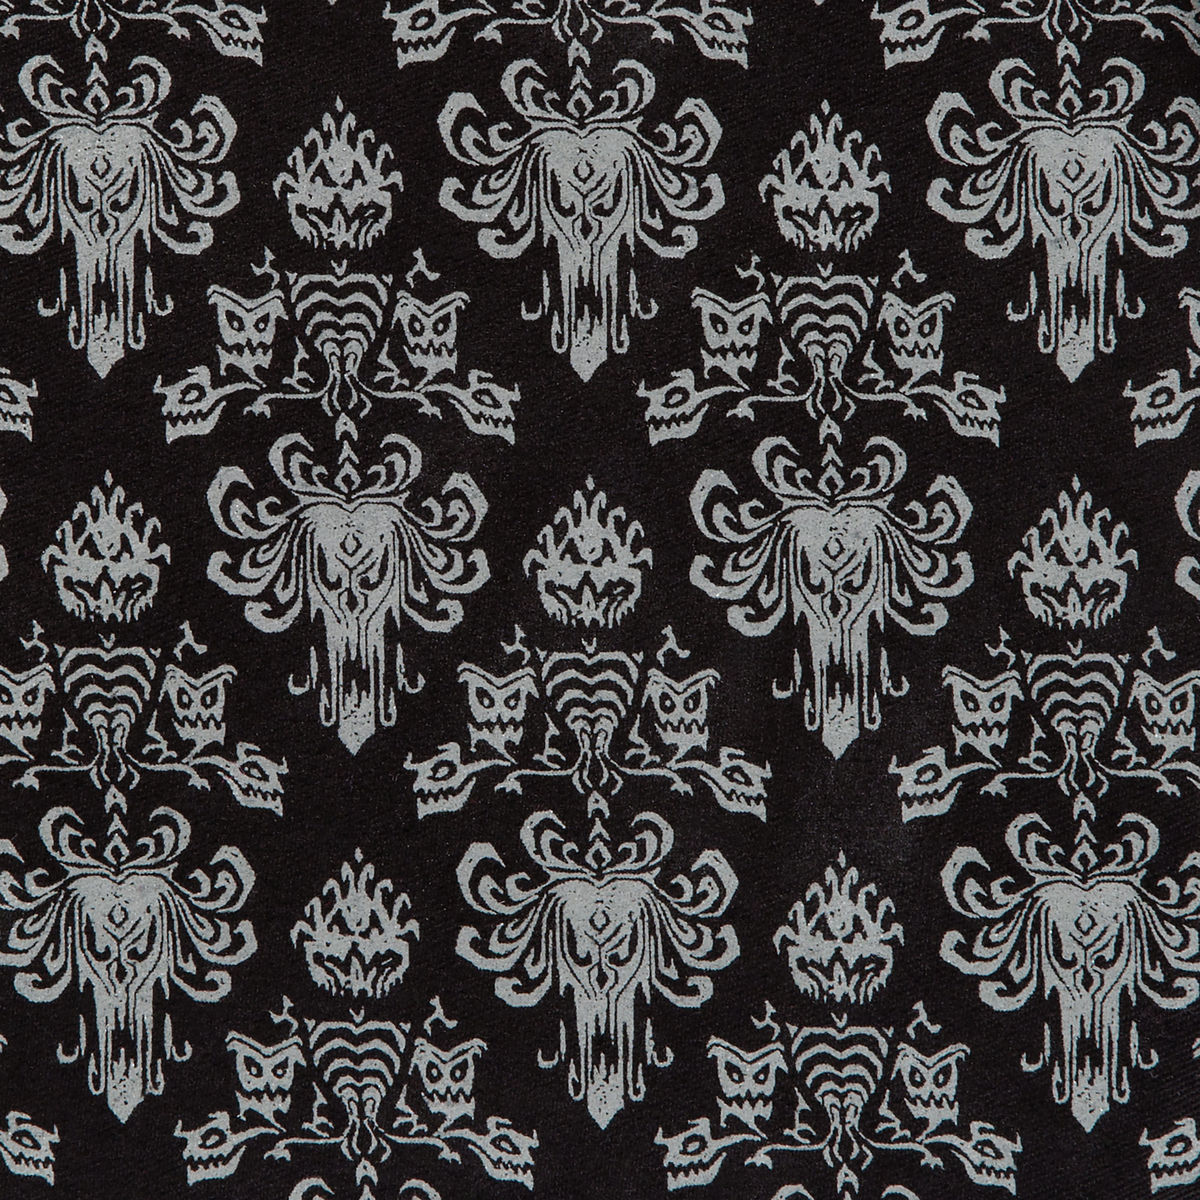 Disney Haunted Mansion Wallpaper Hip Pack by Loungefly New with Tags